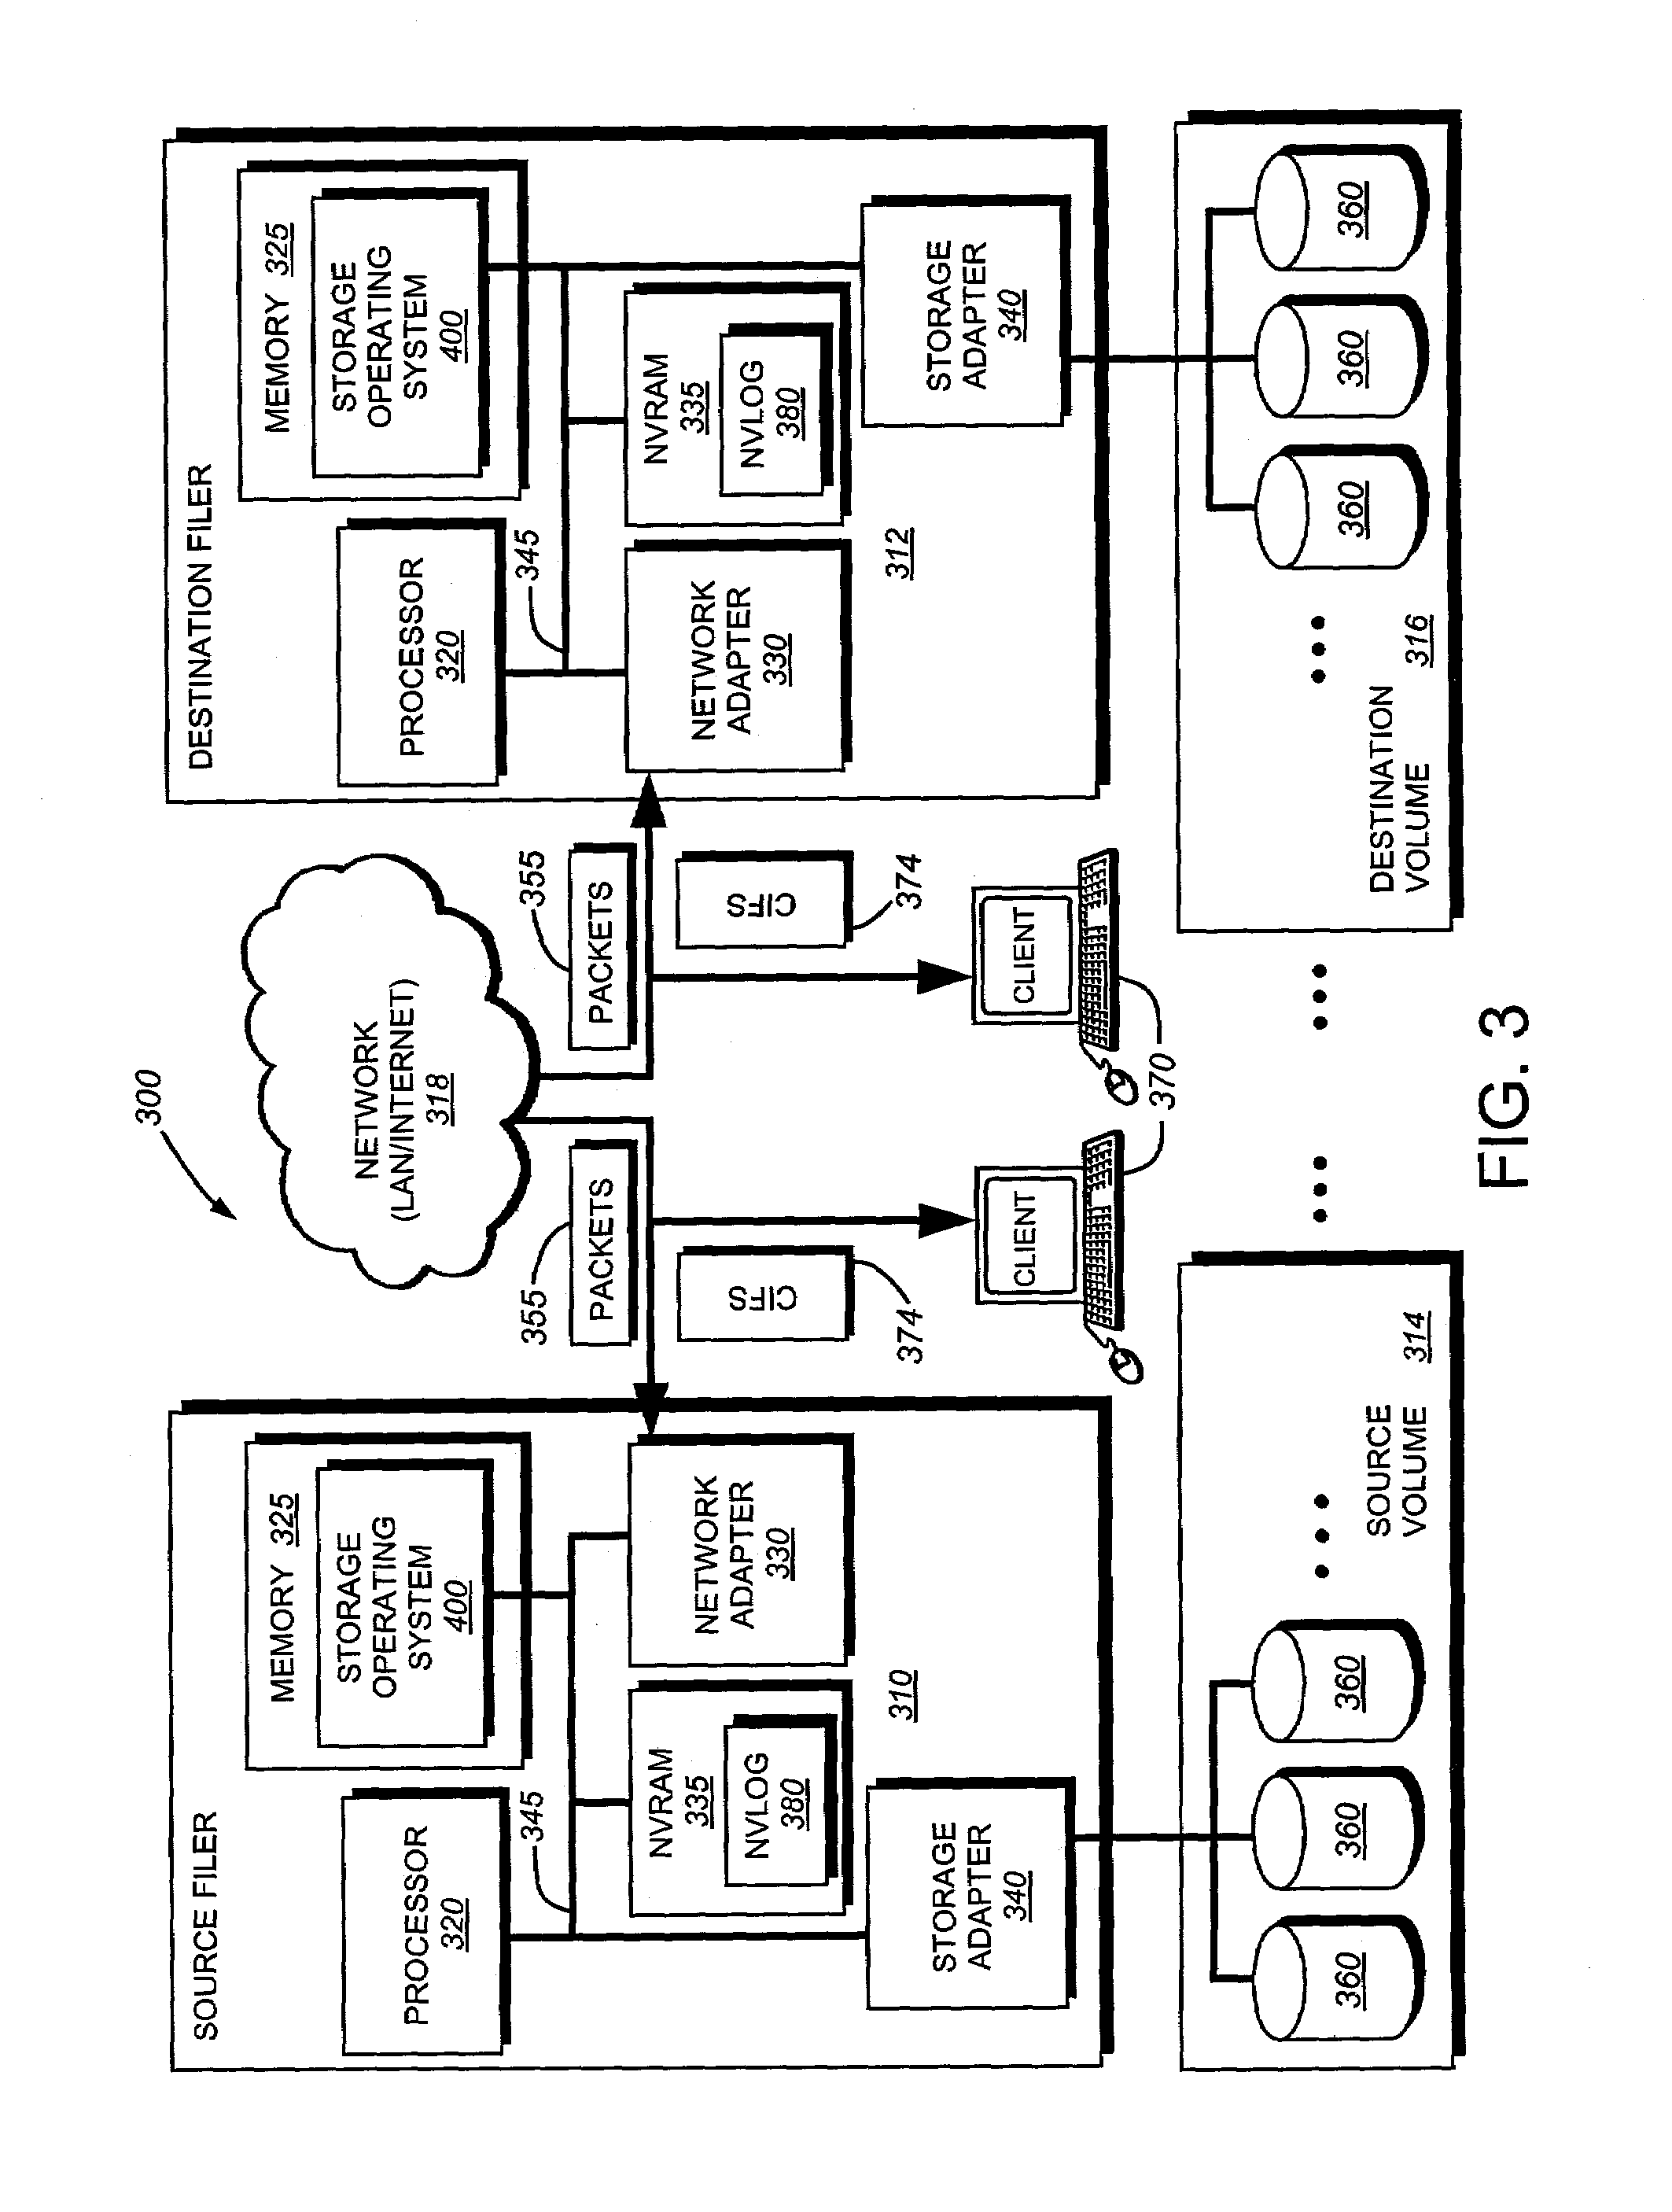 System and method for checkpointing and restarting an asynchronous transfer of data between a source and destination snapshot